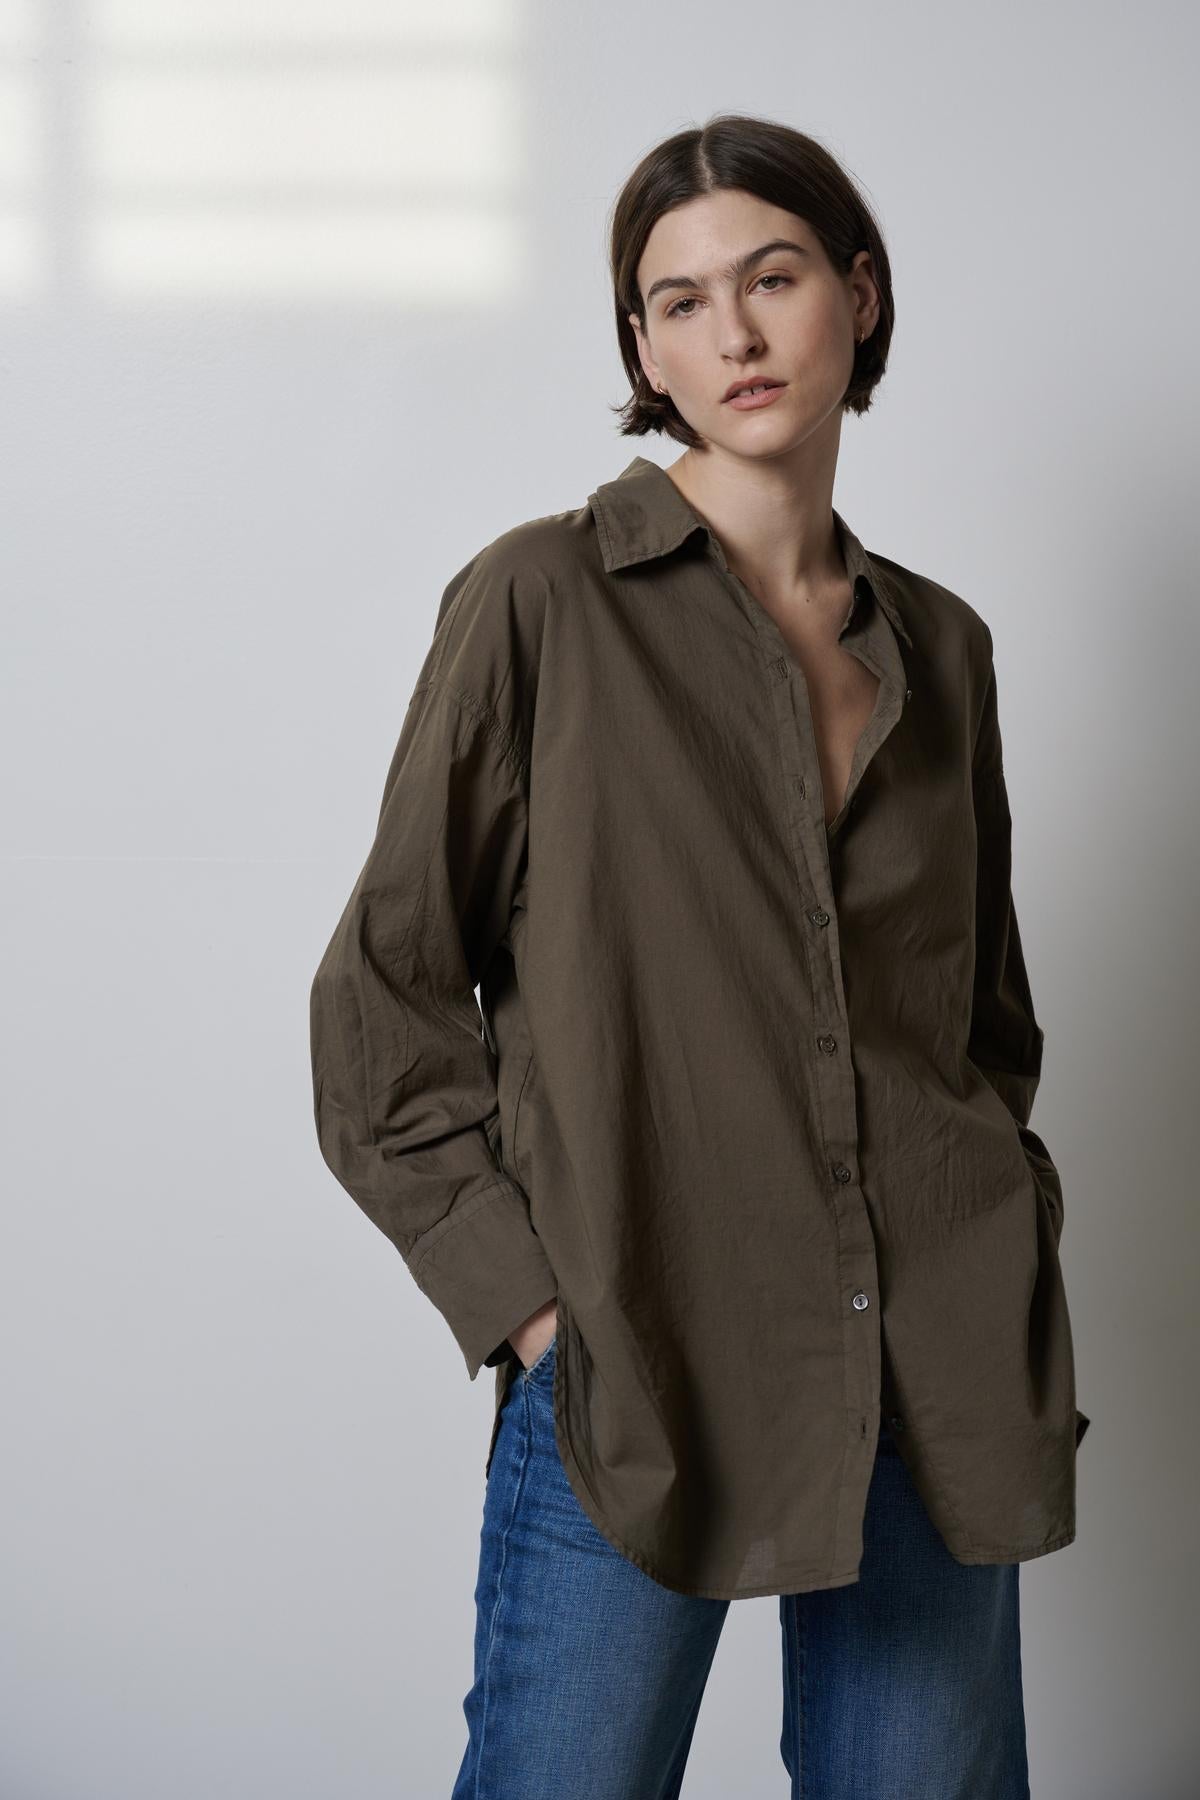 The model is wearing an oversized Velvet by Jenny Graham REDONDO BUTTON-UP SHIRT and jeans.-35783065665729